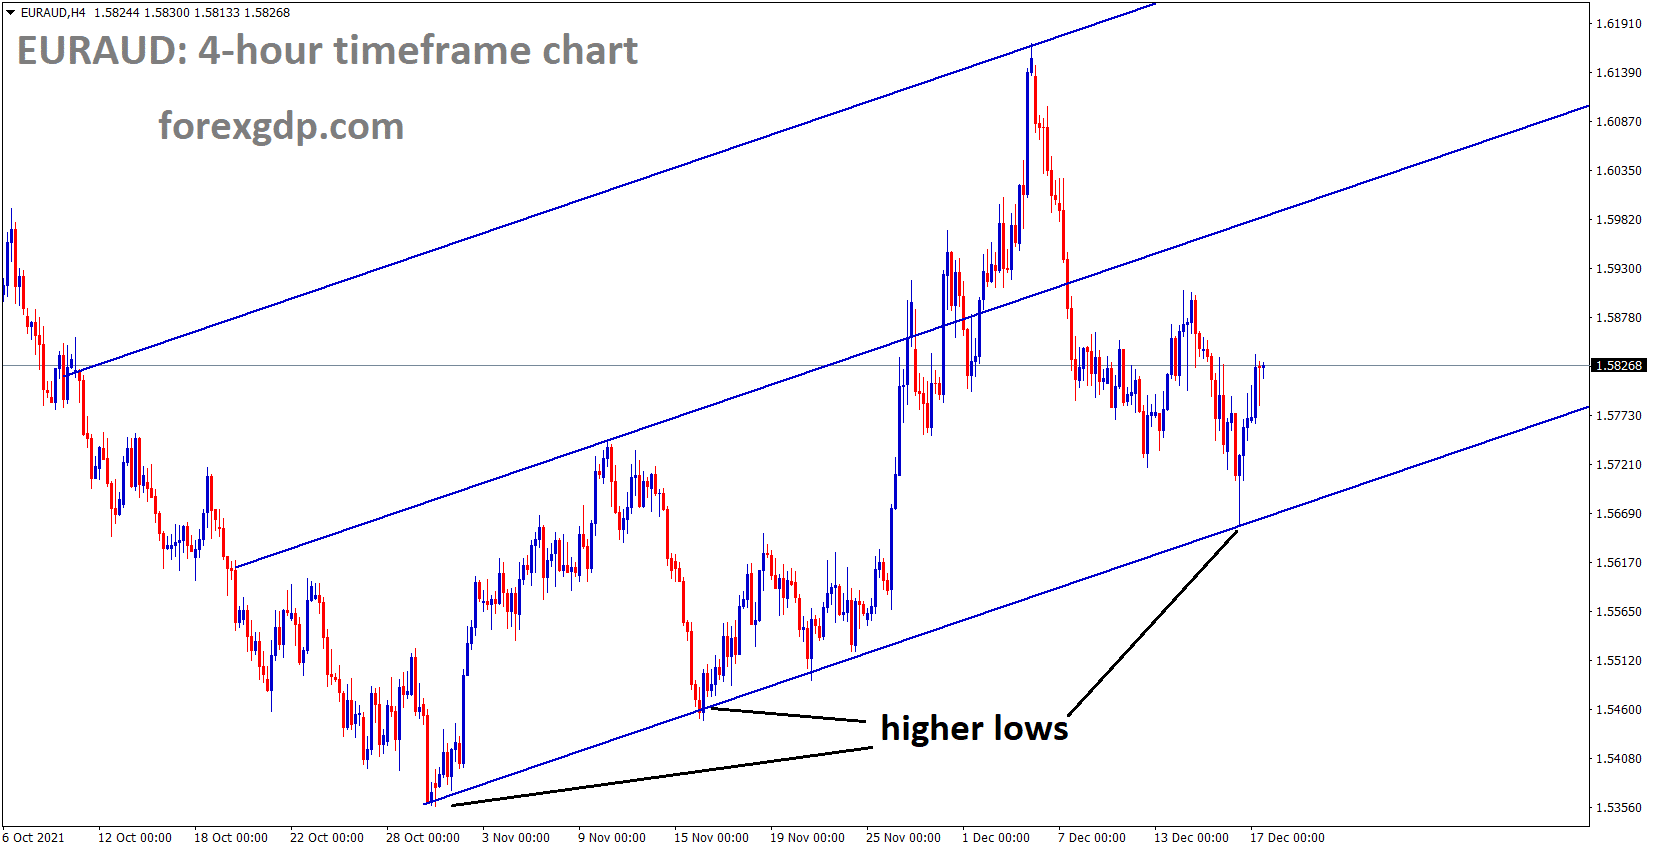 EURAUD is moving in an Ascending channel and the market rebounded from the higher low area of the channel